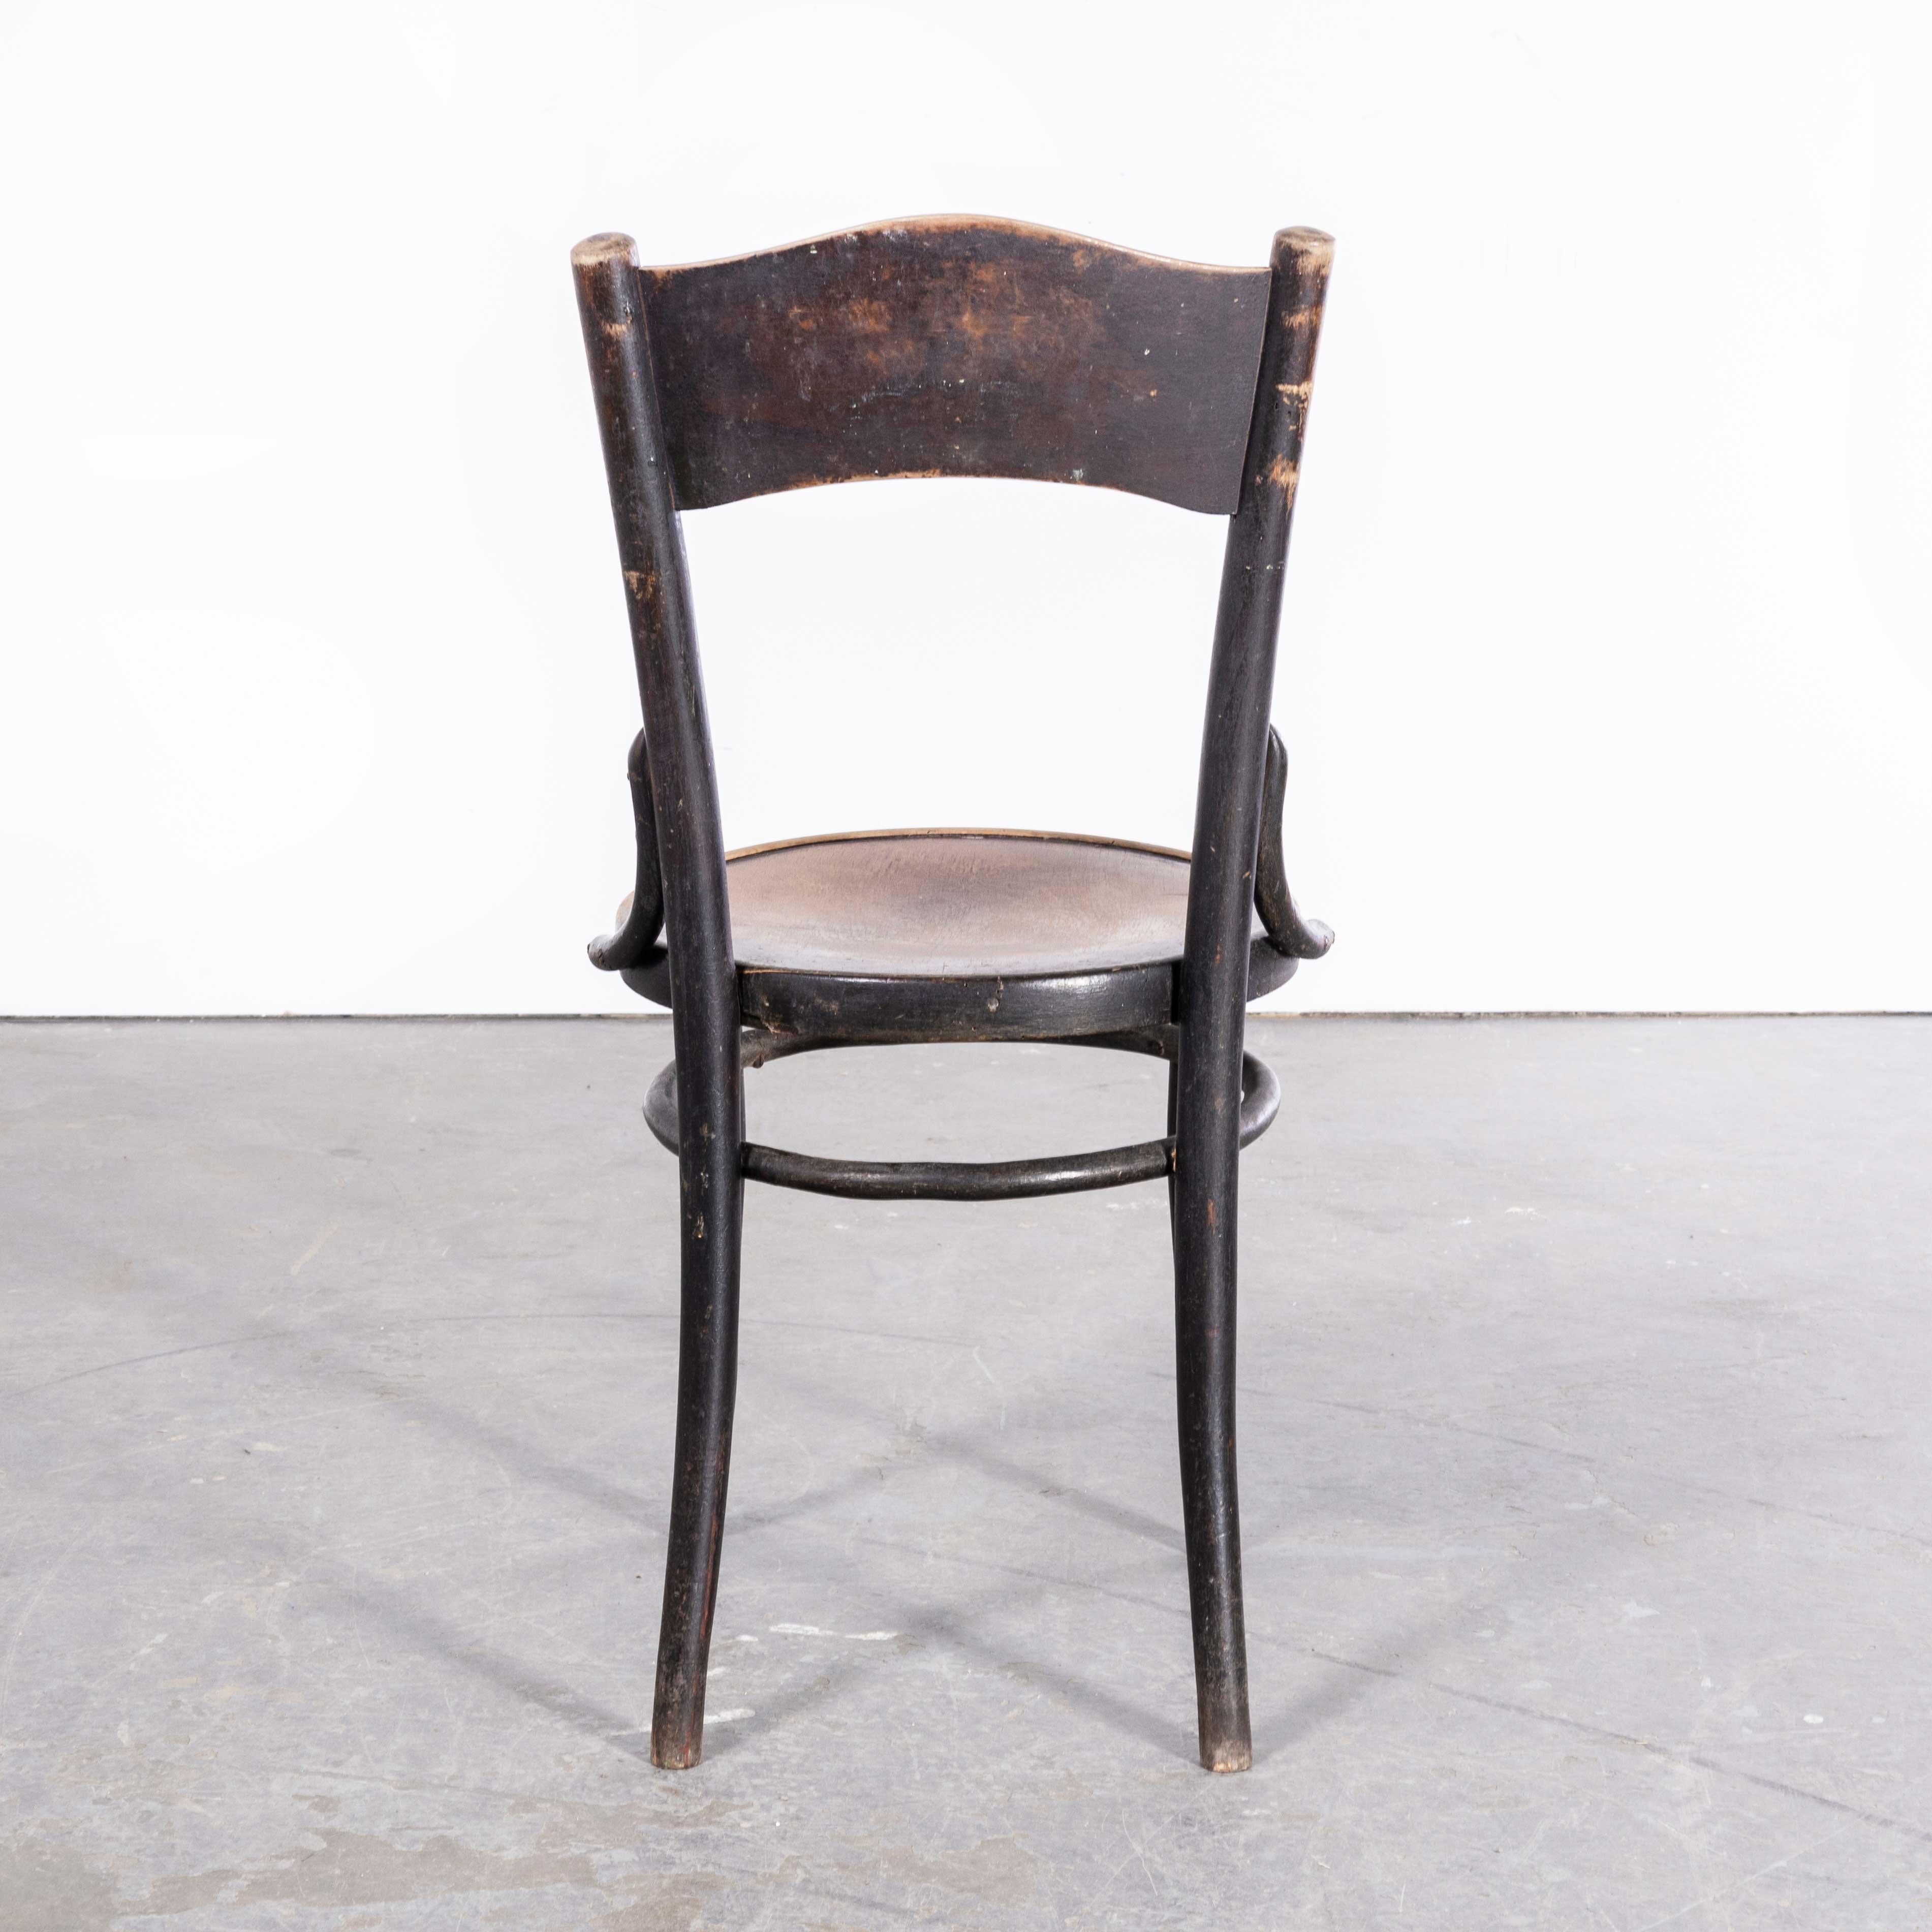 1920s Bentwood Debrecen Contrast Seat Dining Chair
1920s Bentwood Debrecen Contrast Seat Dining Chair. It is hard to be precise about the origin of this chair as little history is known, but what we do know is at the beginning of the 20th century